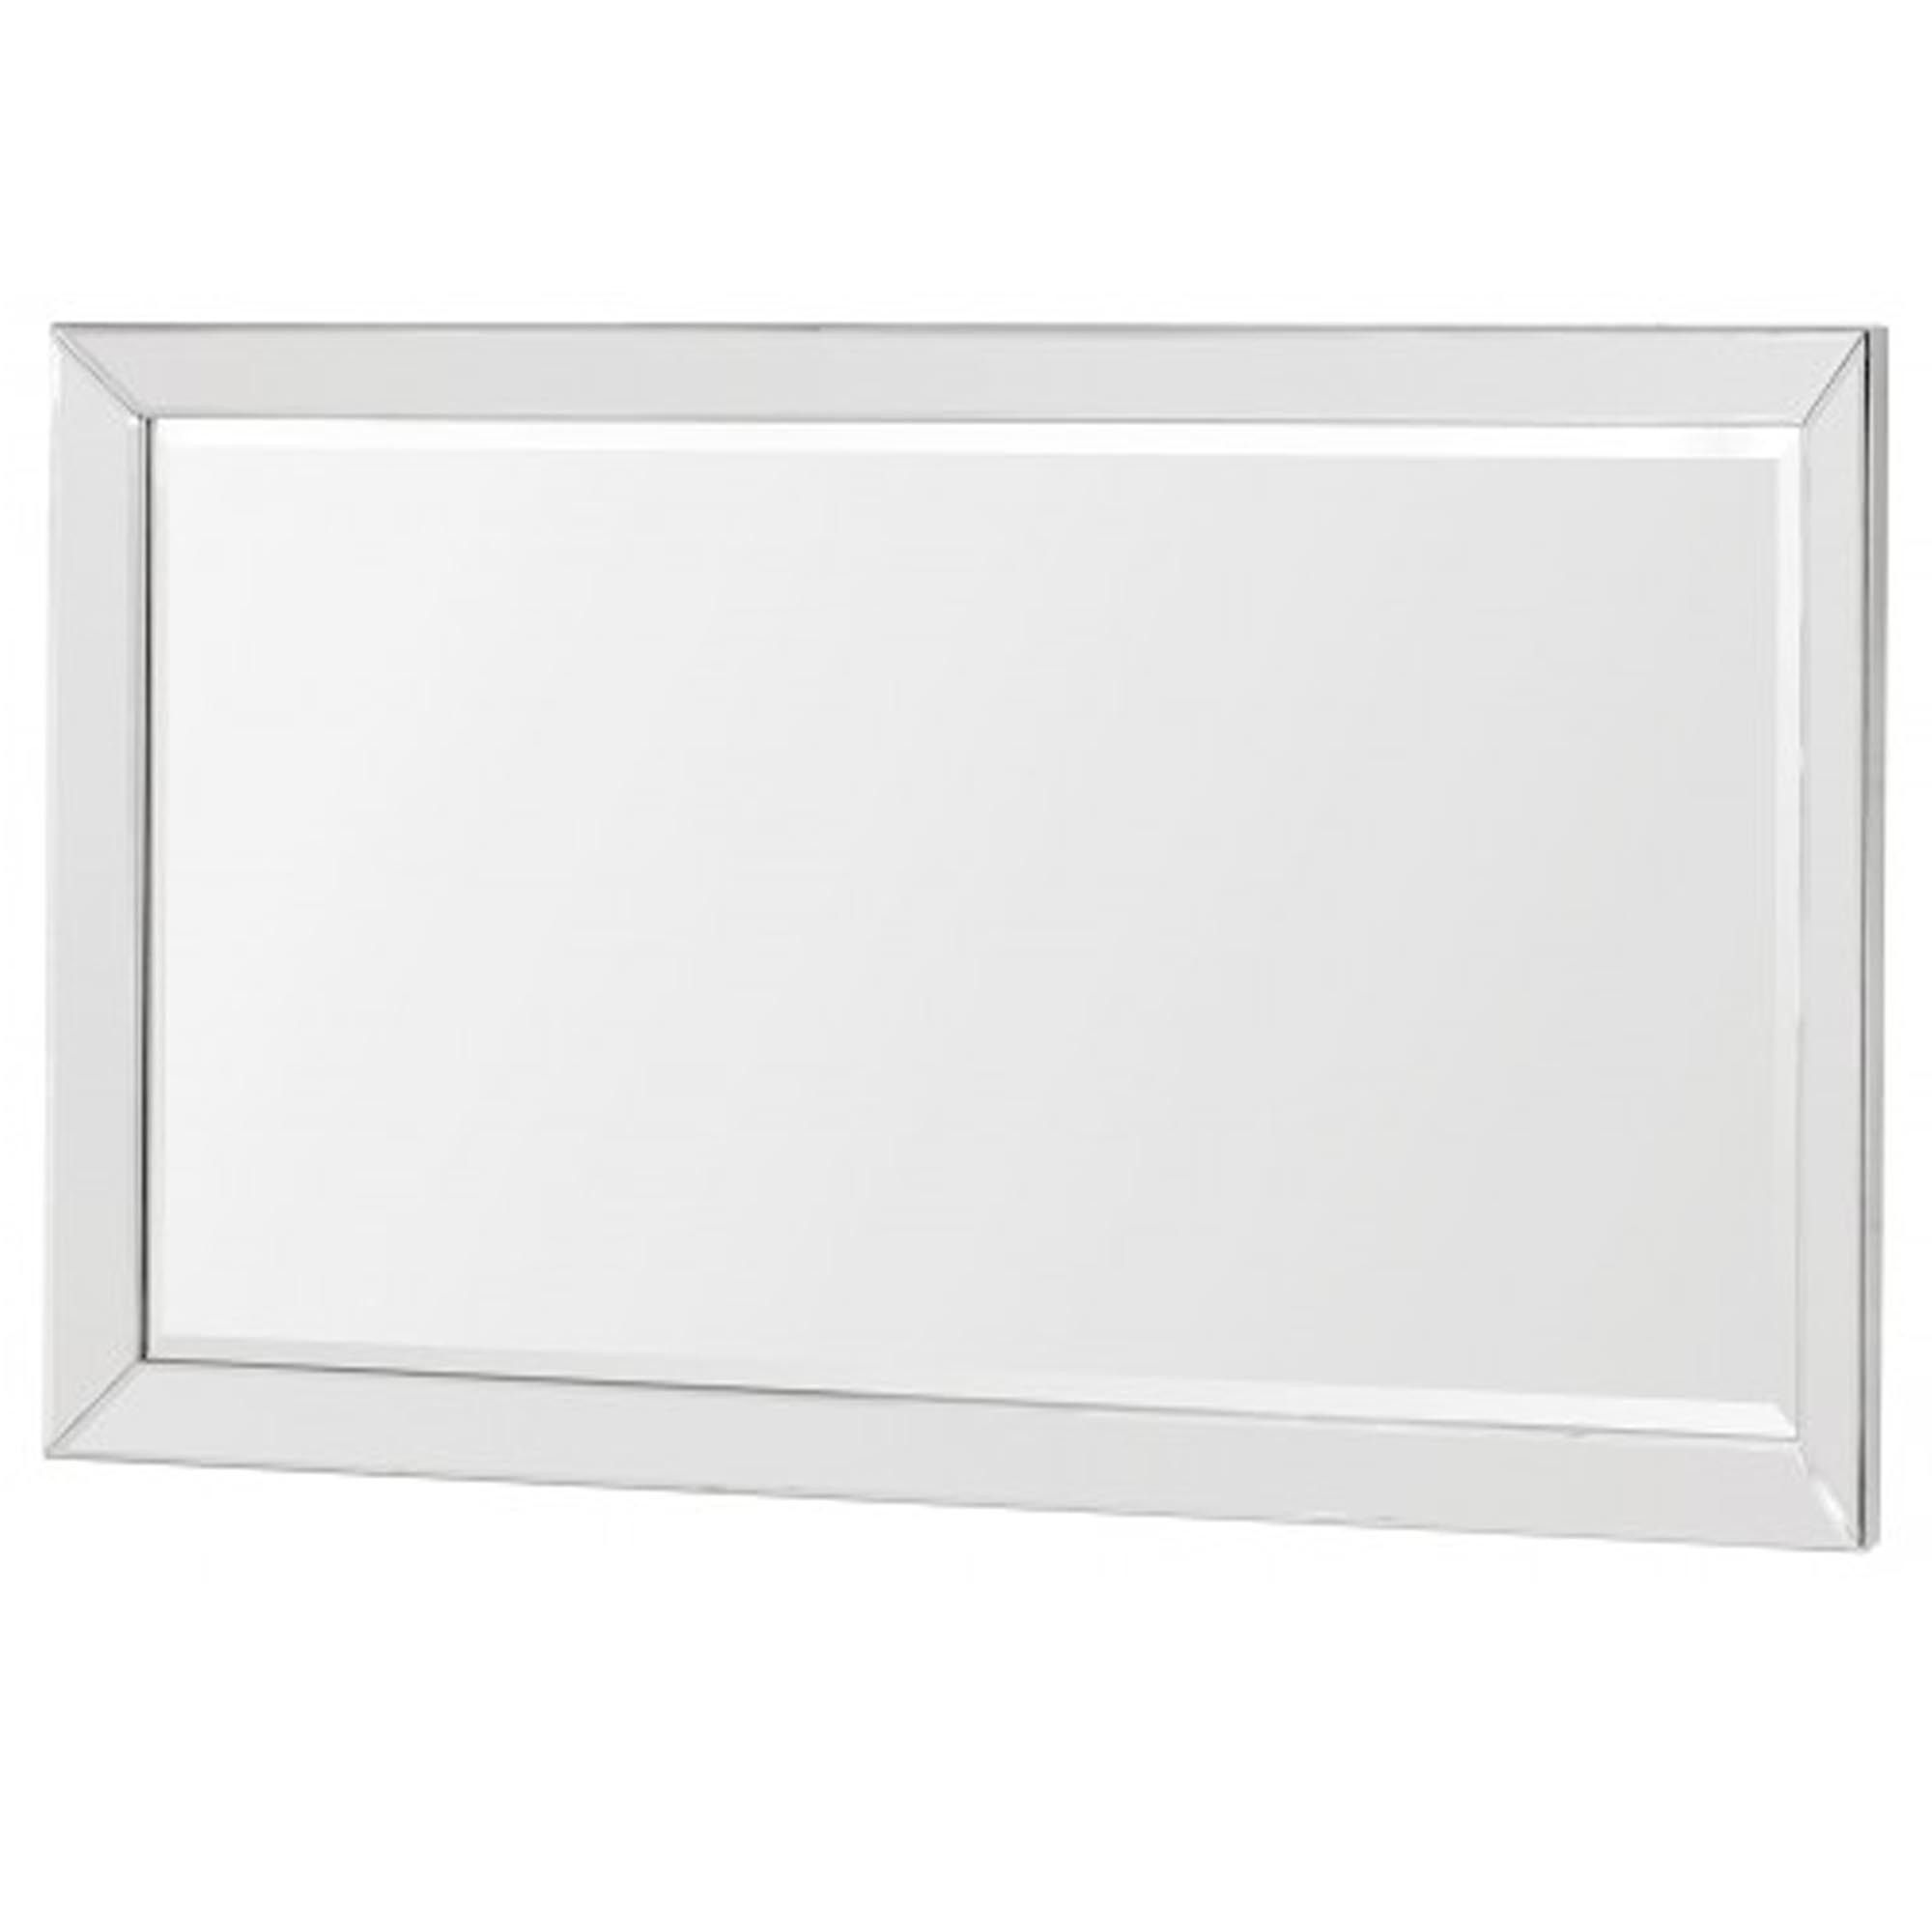 Widely Used Landscape Wall Mirrors Inside Landscape Wall Mirror (View 1 of 20)